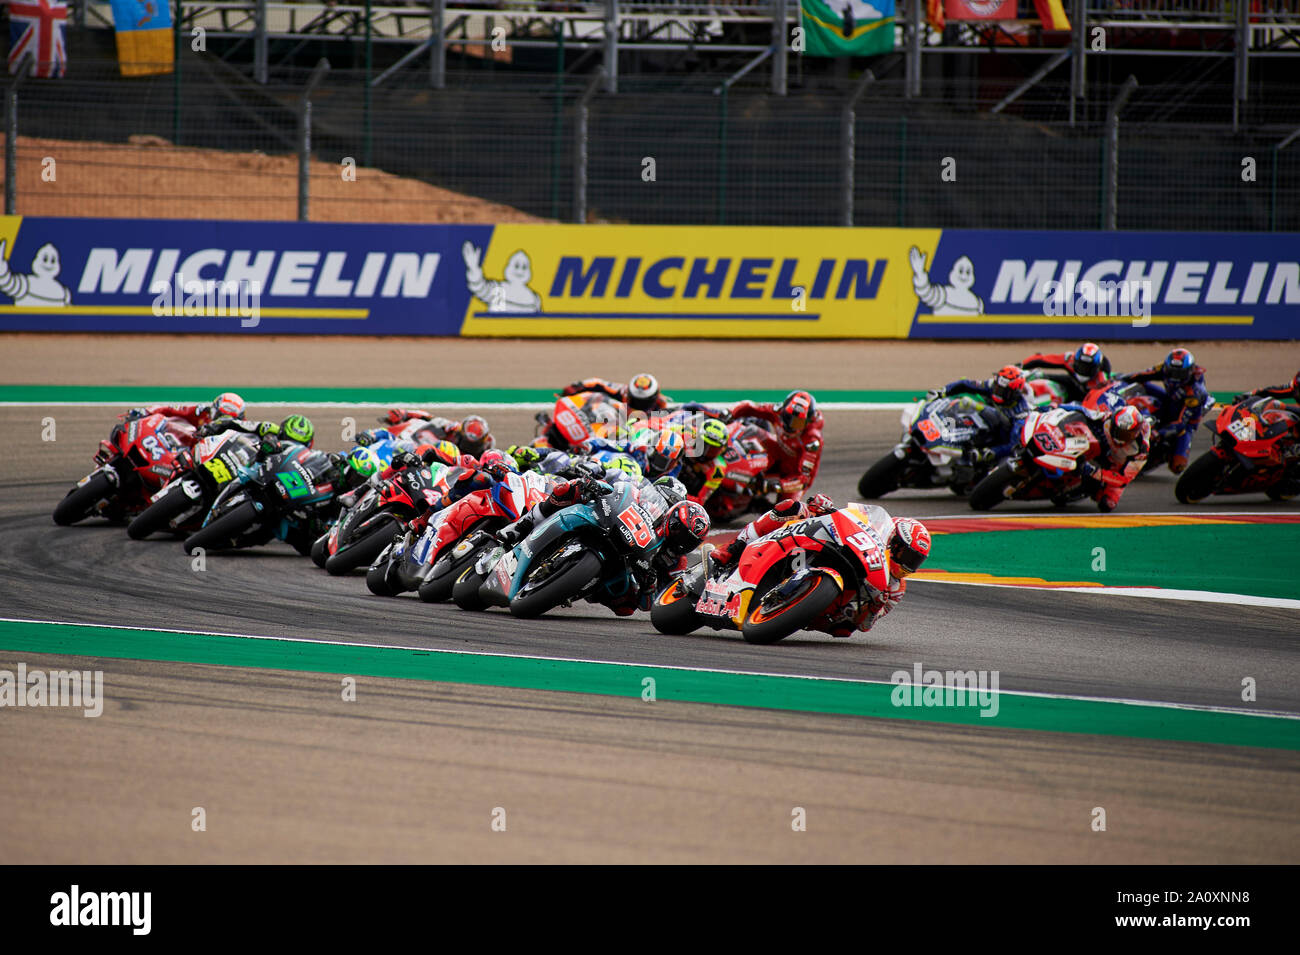 22nd September 2019; Ciudad del Motor de Aragon, Alcaniz, Spain; Aragon Motorcycle Grand Prix, Race Day; Marc Marquez of the Repsol Honda Team leads during the start of the race Stock Photo